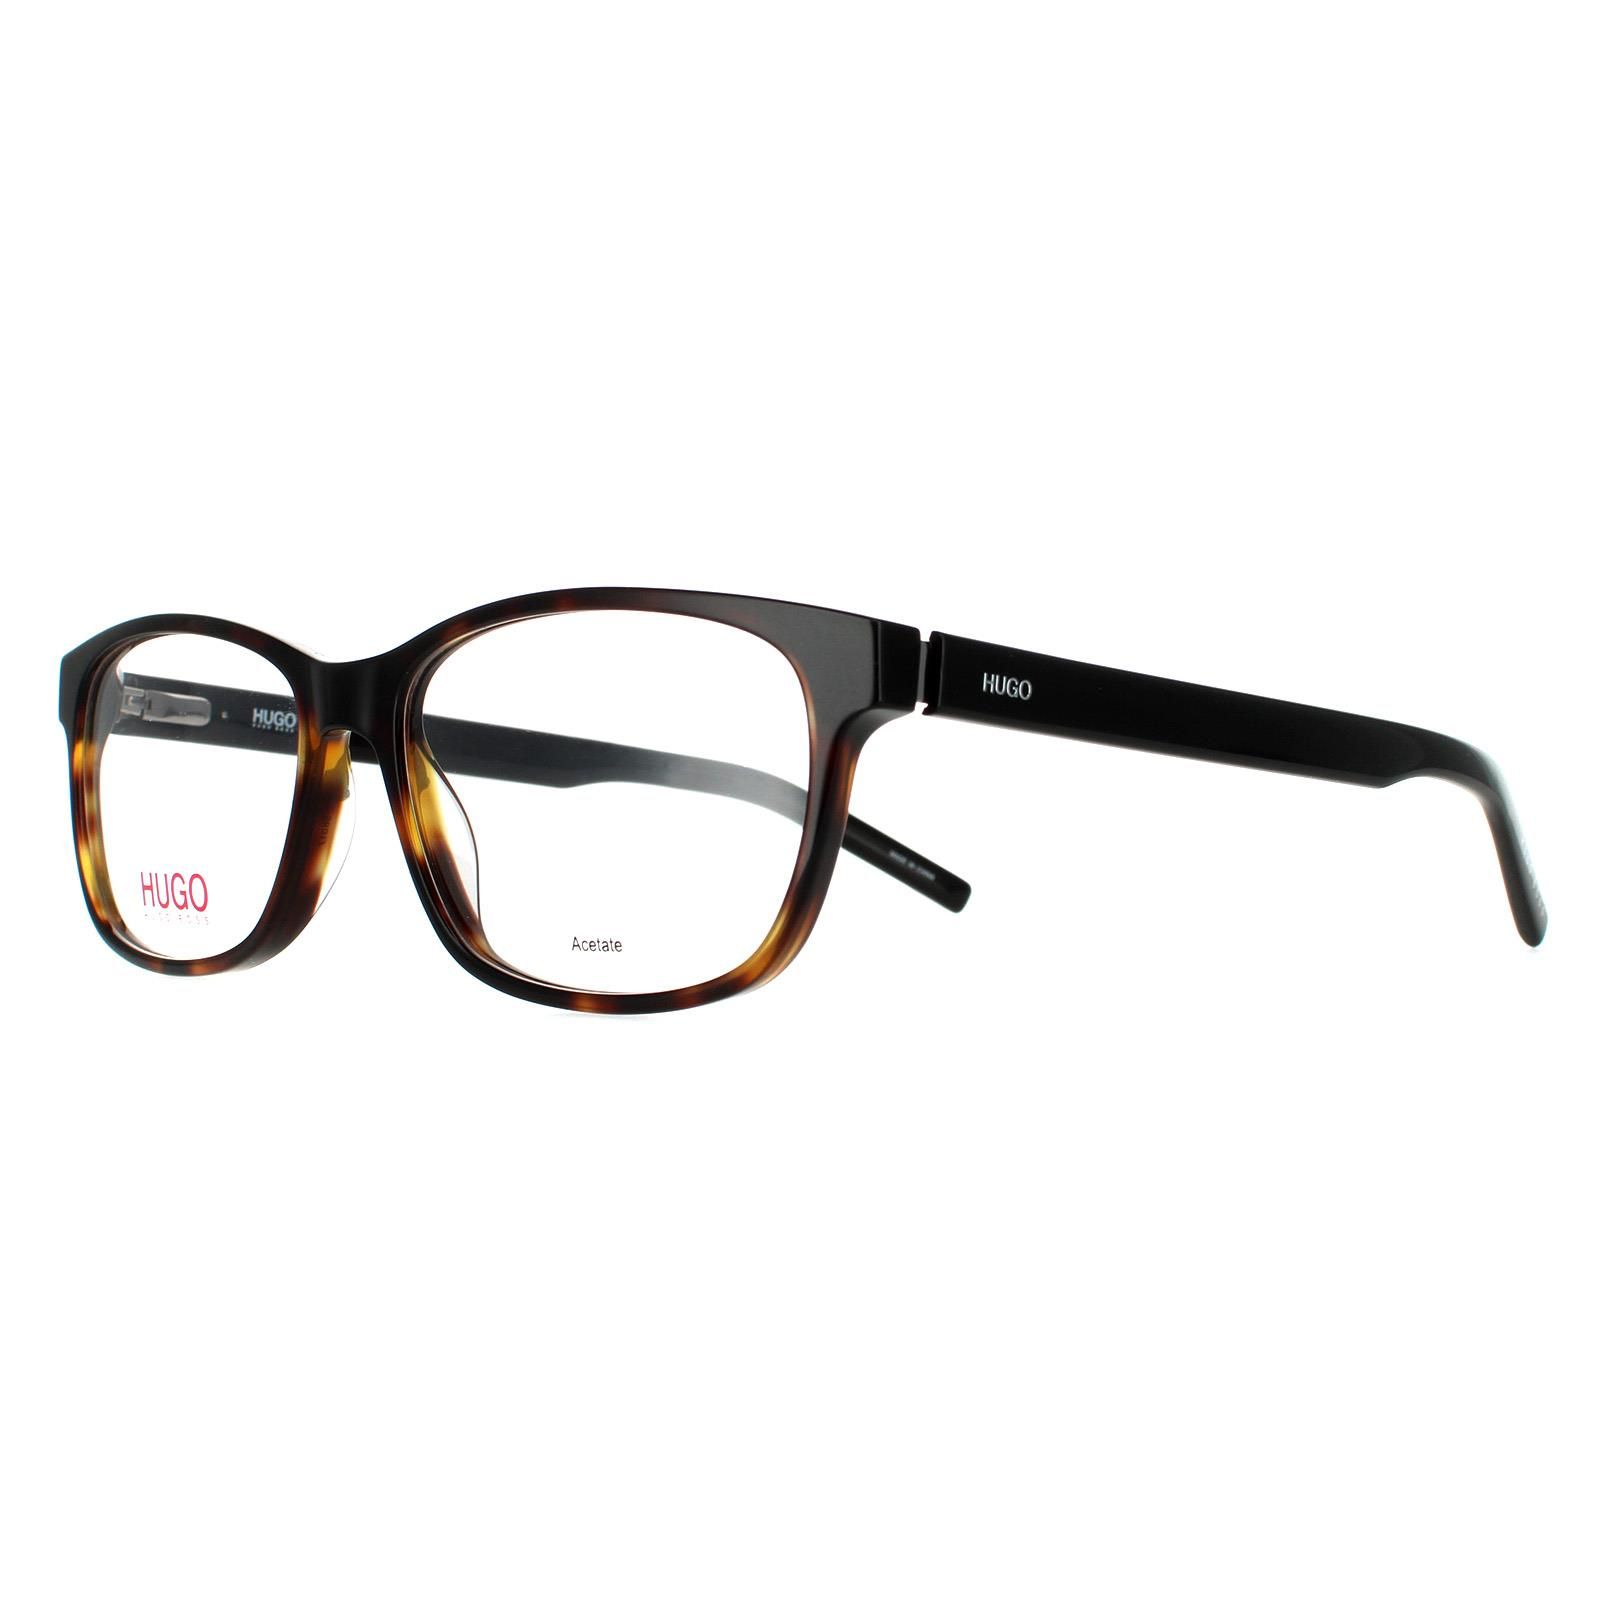 Hugo by Hugo Boss Rectangular Mens Dark Havana Glasses Frames HG 1115 are a classic square shape crafted from lightweight acetate. The Hugo Boss logo features along the temple for brand authenticity.